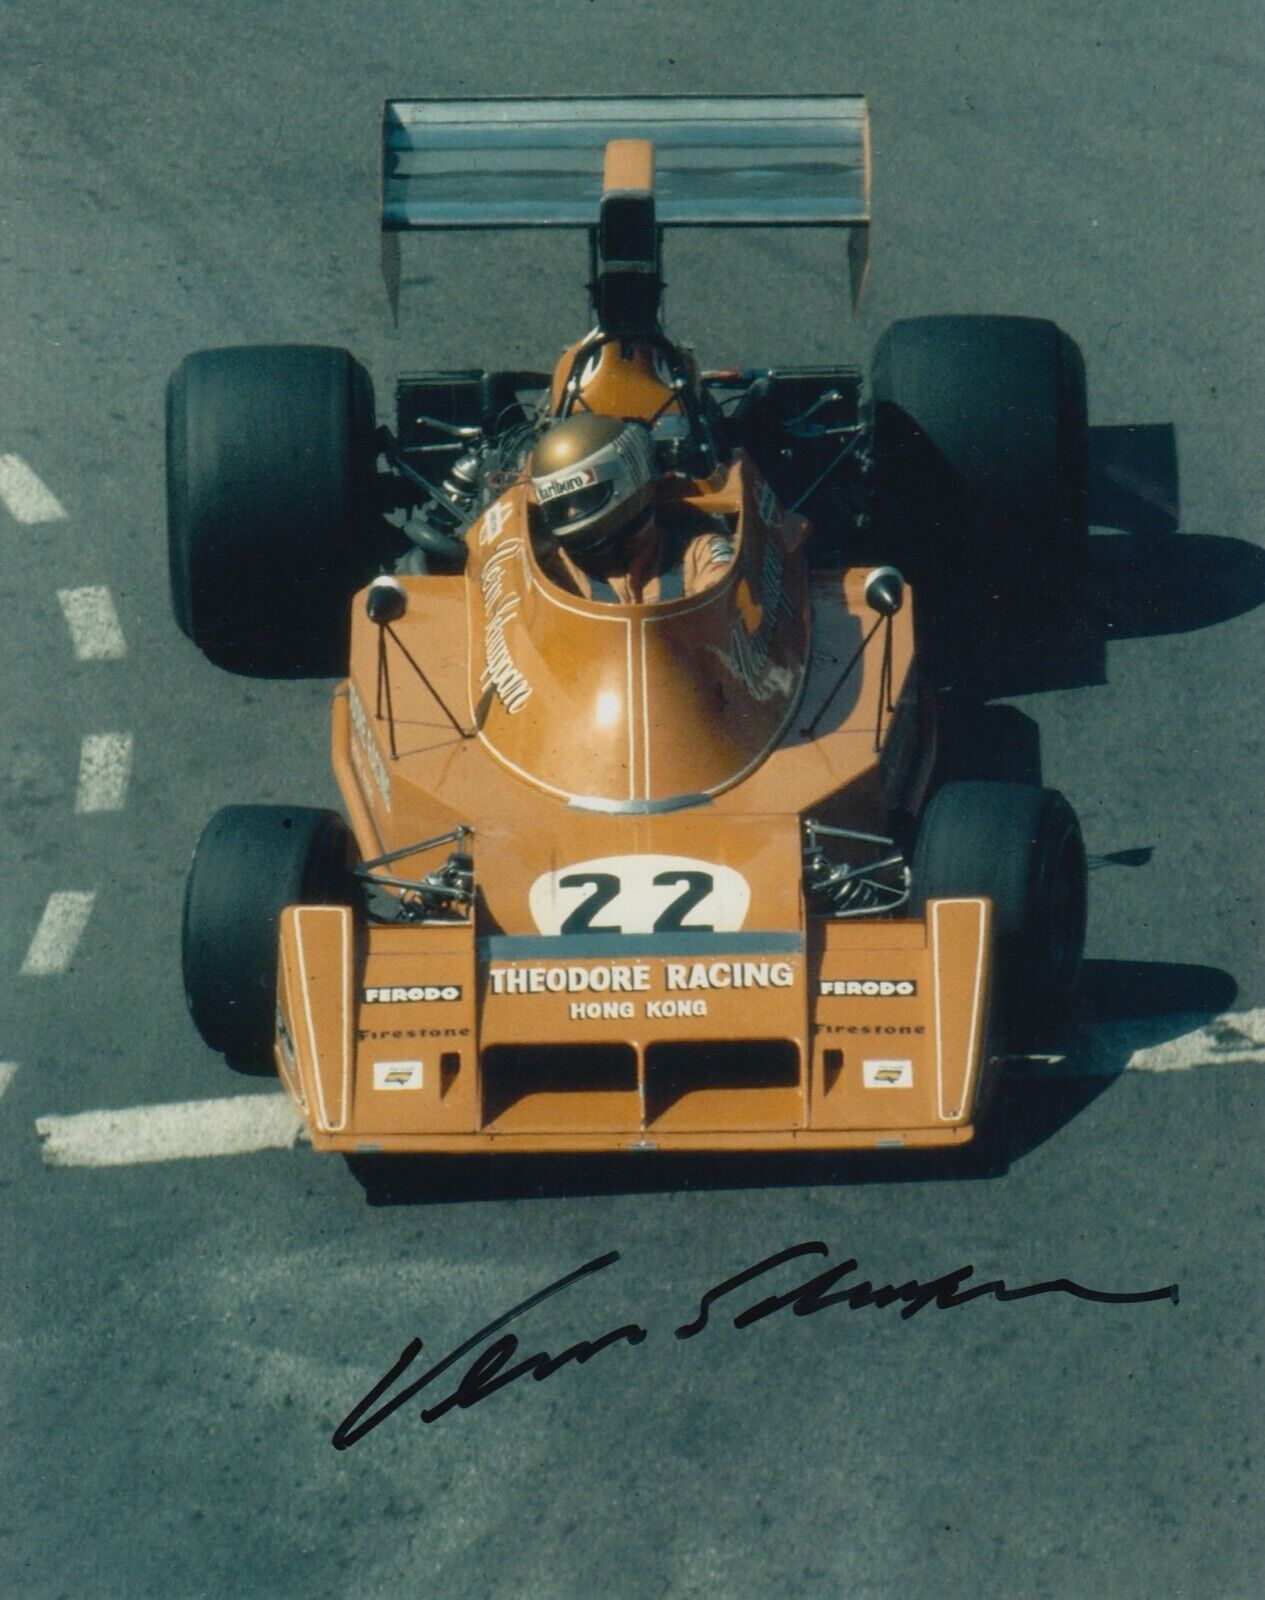 Vern Schuppan Hand Signed 10x8 Photo Poster painting F1 Autograph Theodore Racing